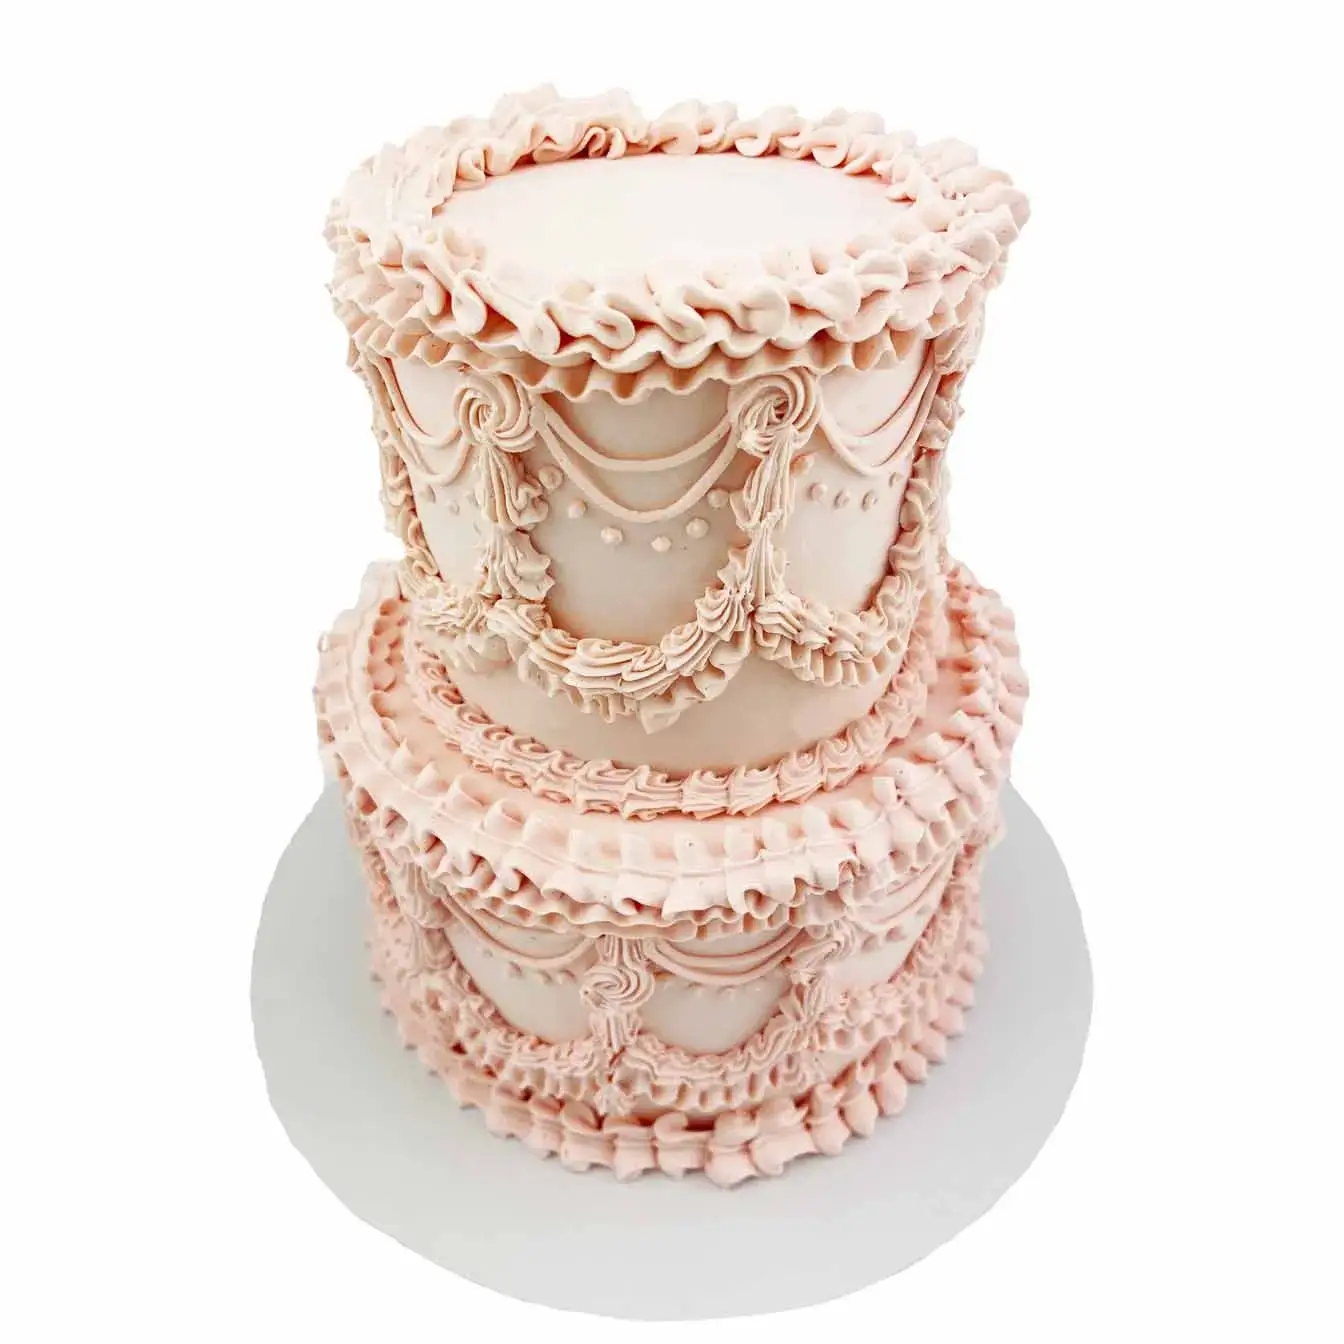 Elegant Pink Piped Cake with Intricate Lambeth Style Floral Patterns and Scrollwork